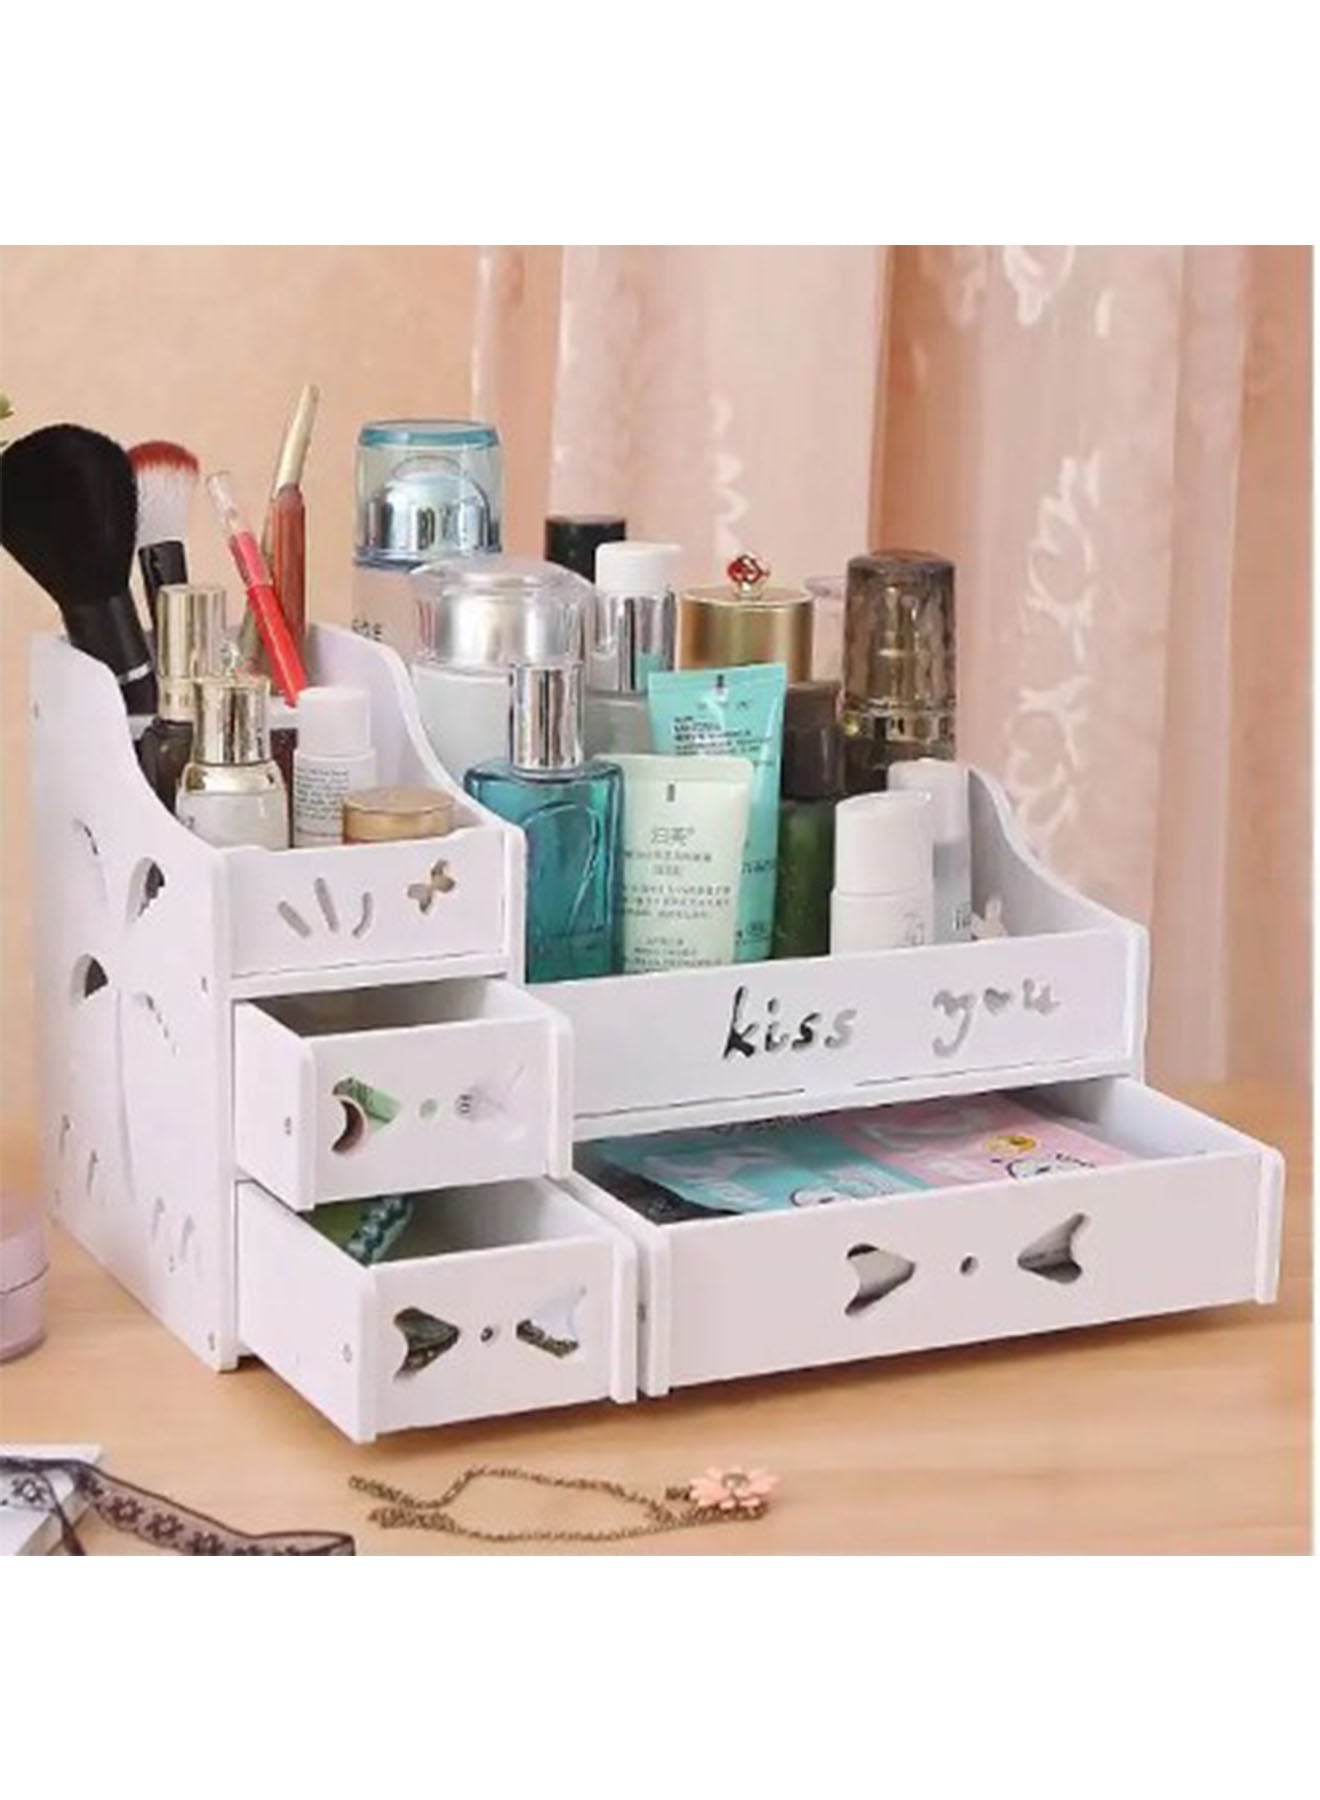 DANIM Wooden Dressing Organizer Palm Trees Makeup Organizer Vanity Box with Drawers for Cosmetics Jewelry Accessories Purpose Plastic Tabletop Cabinet for Storage & Display